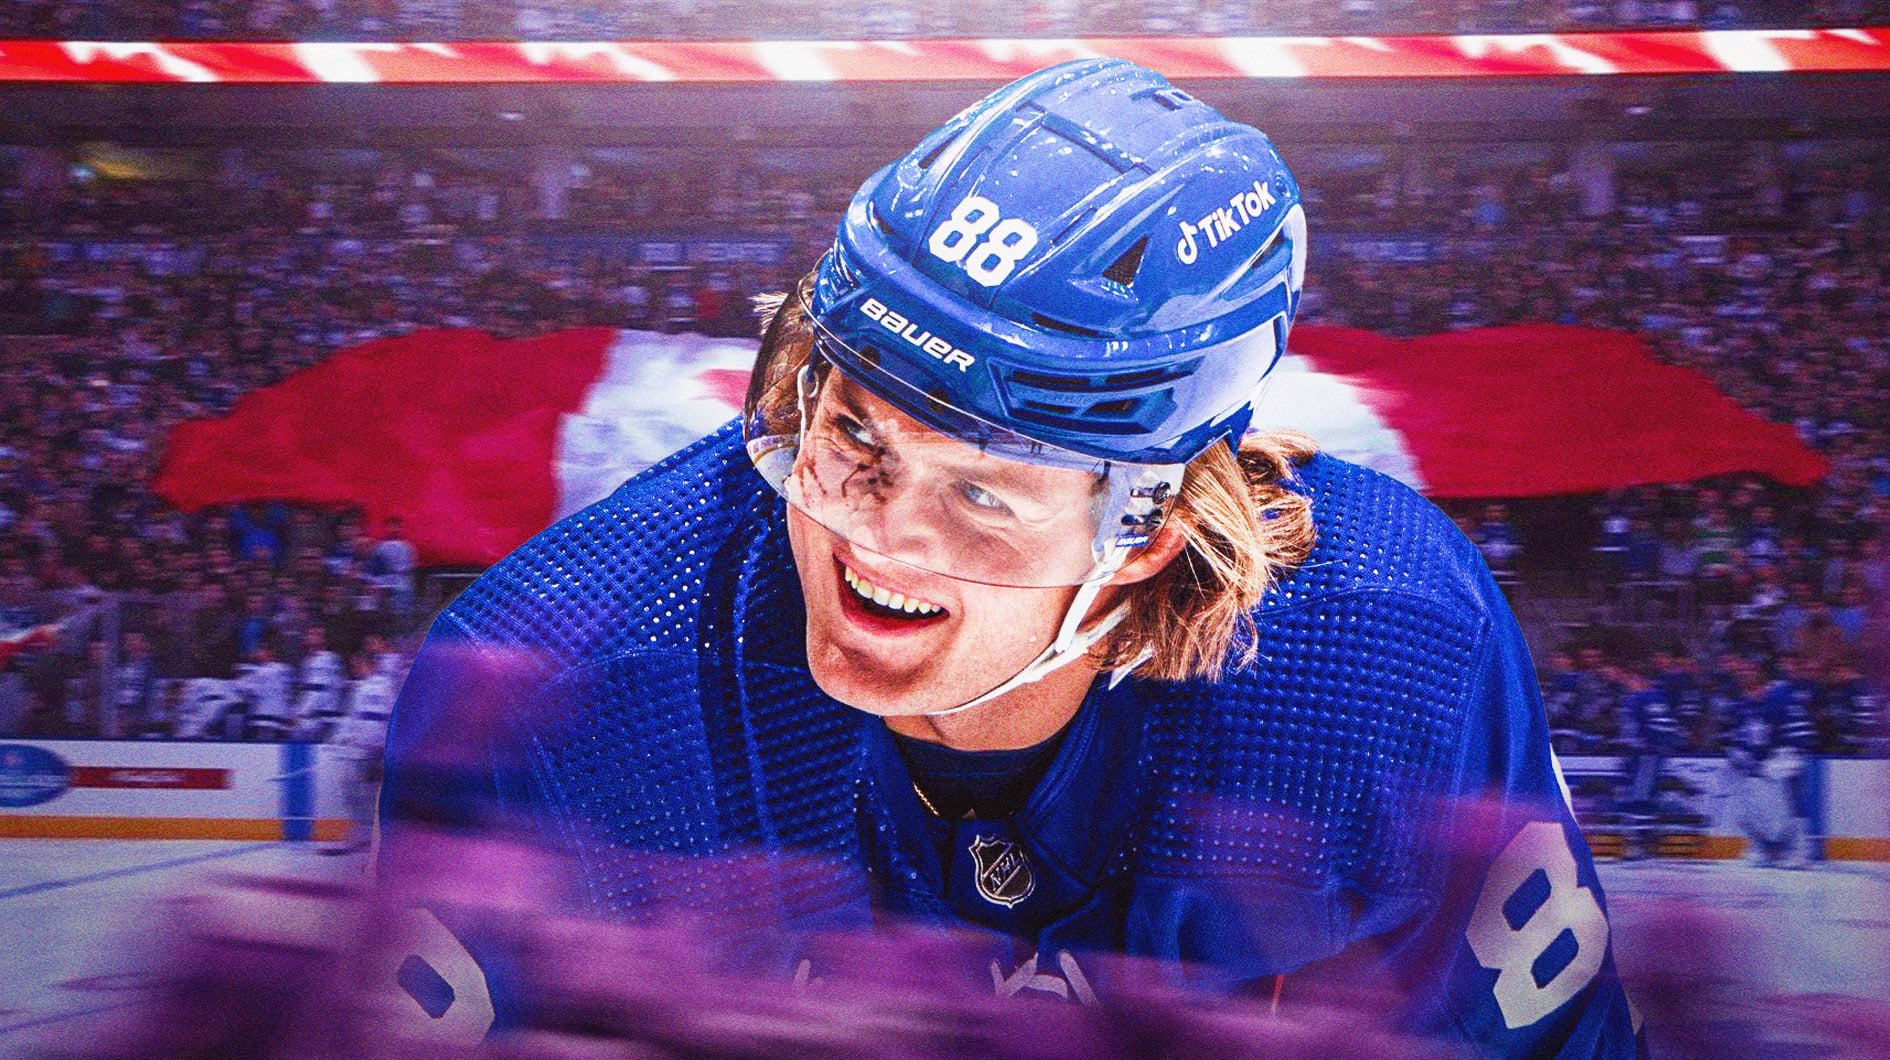 William Nylander smiling with Maple Leafs fans cheering